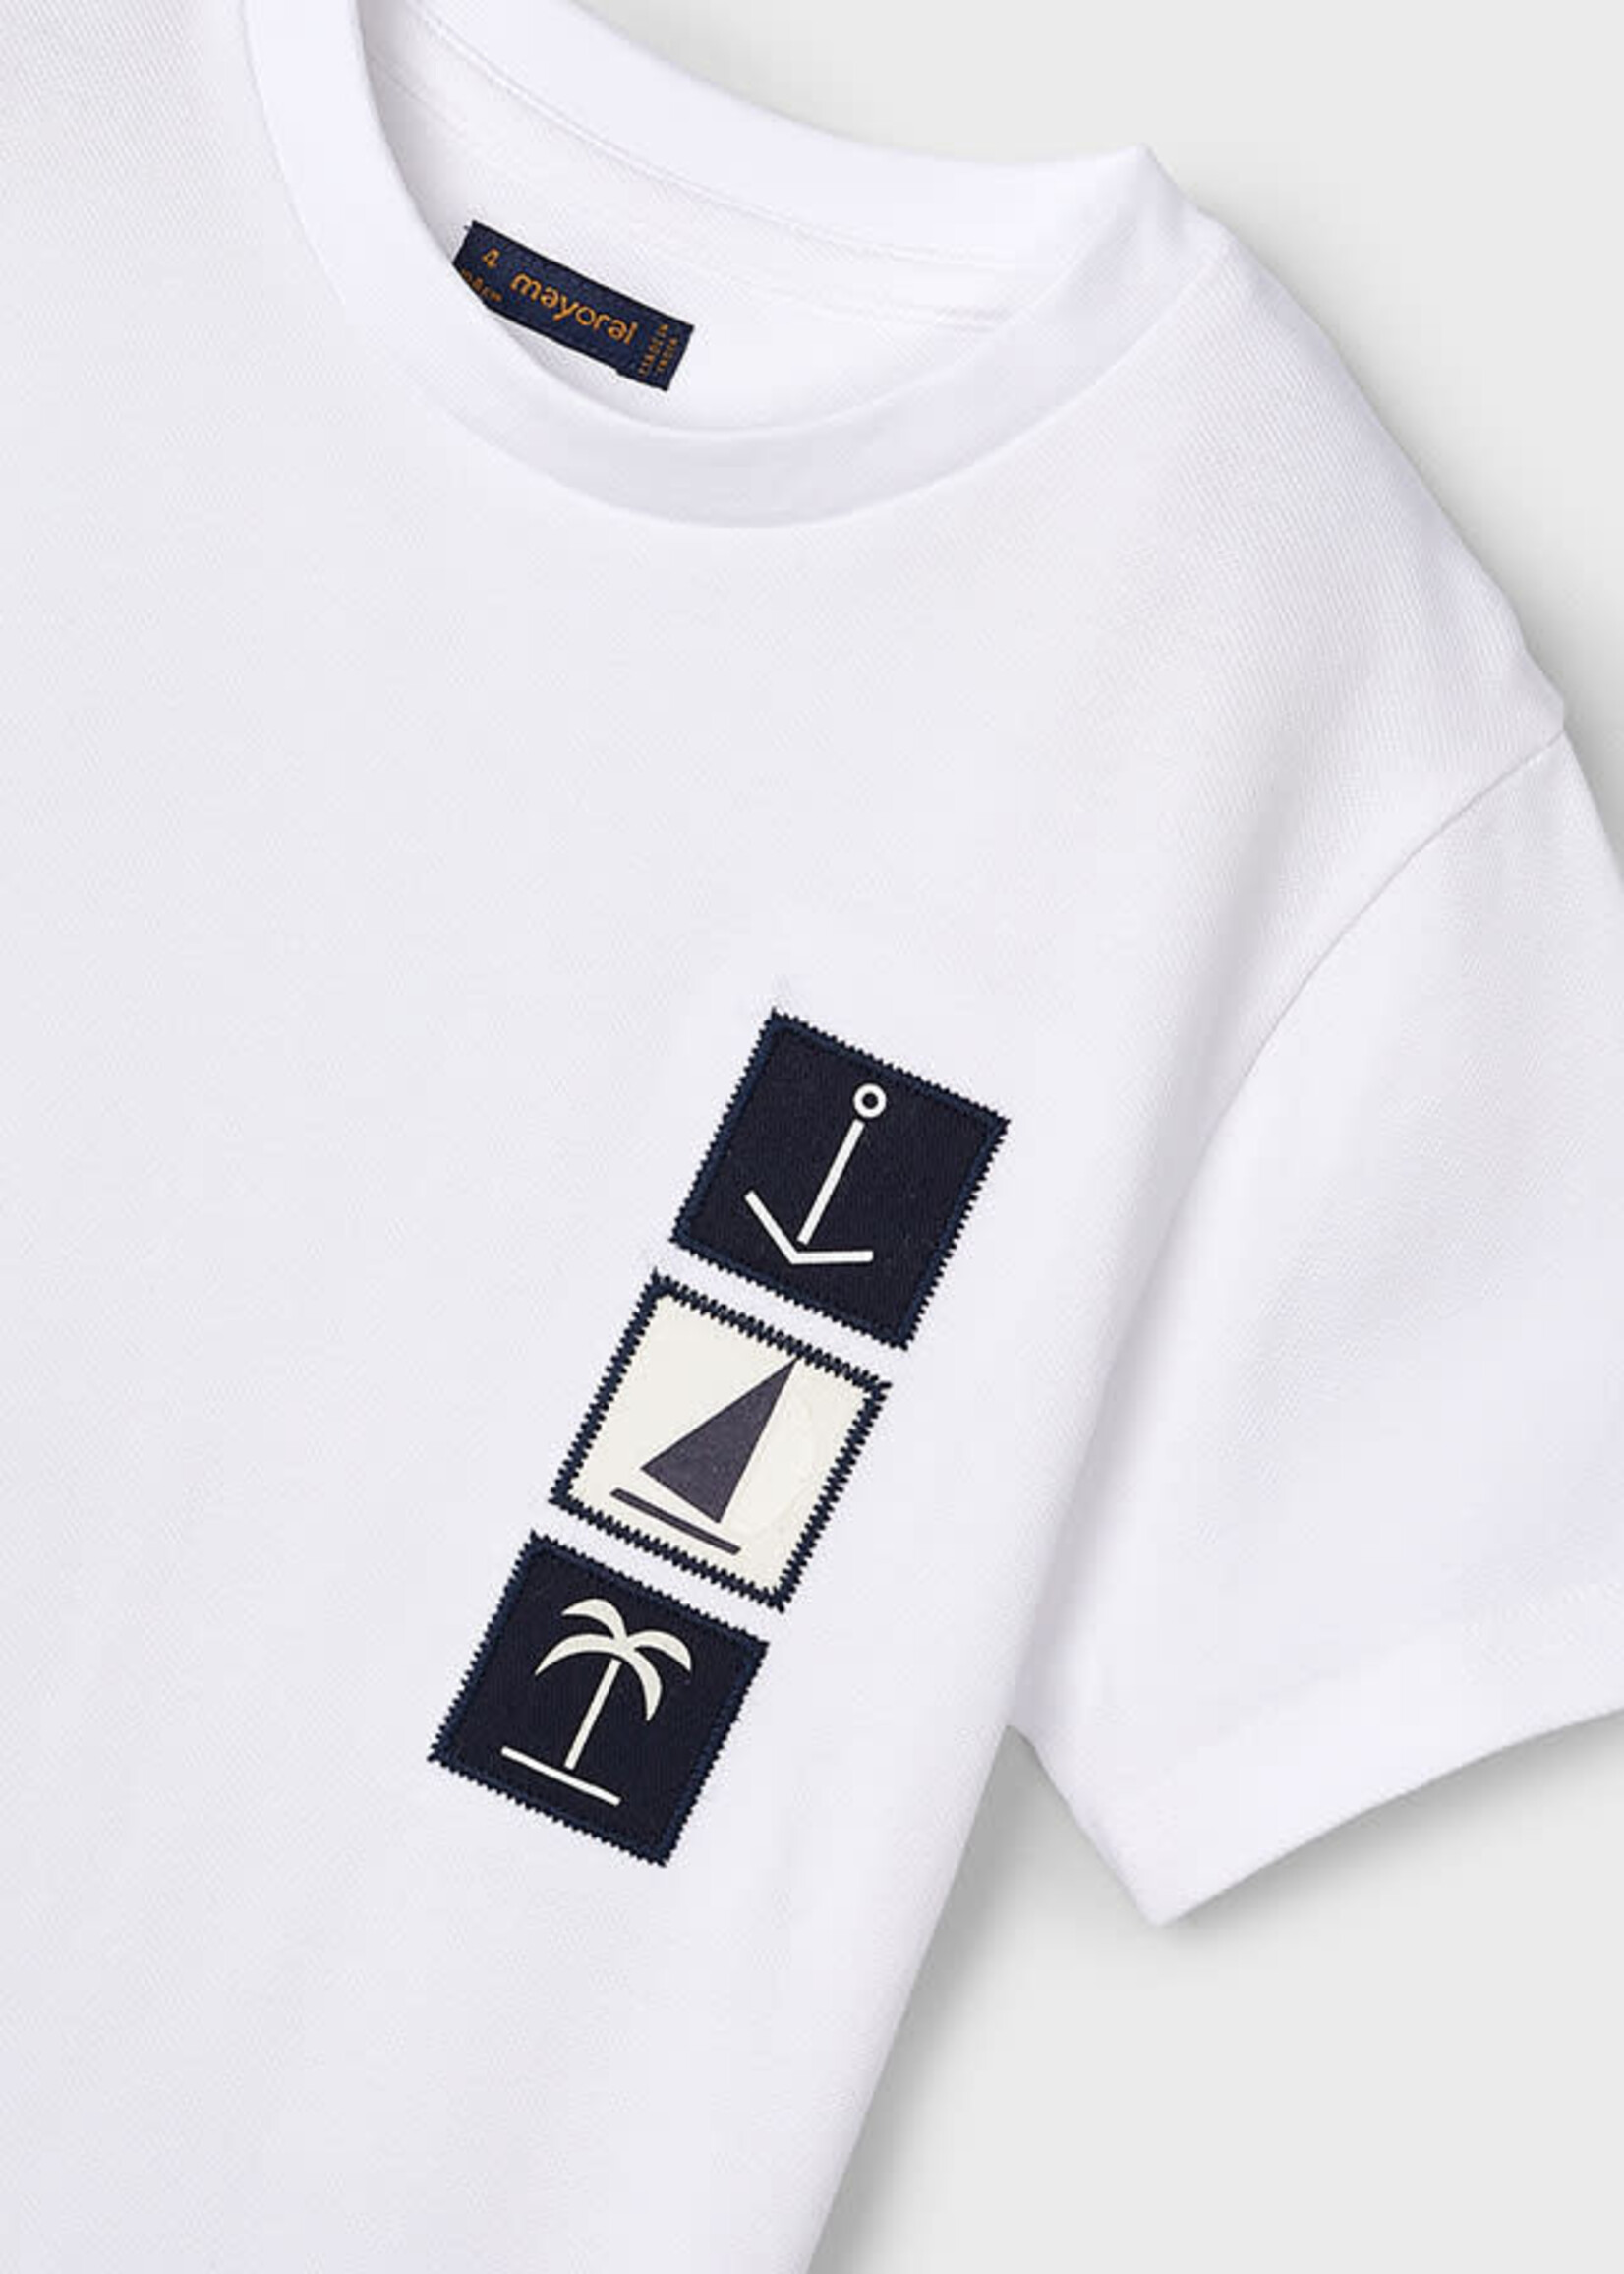 Mayoral Mayoral S/s t-shirt White - 24 03001